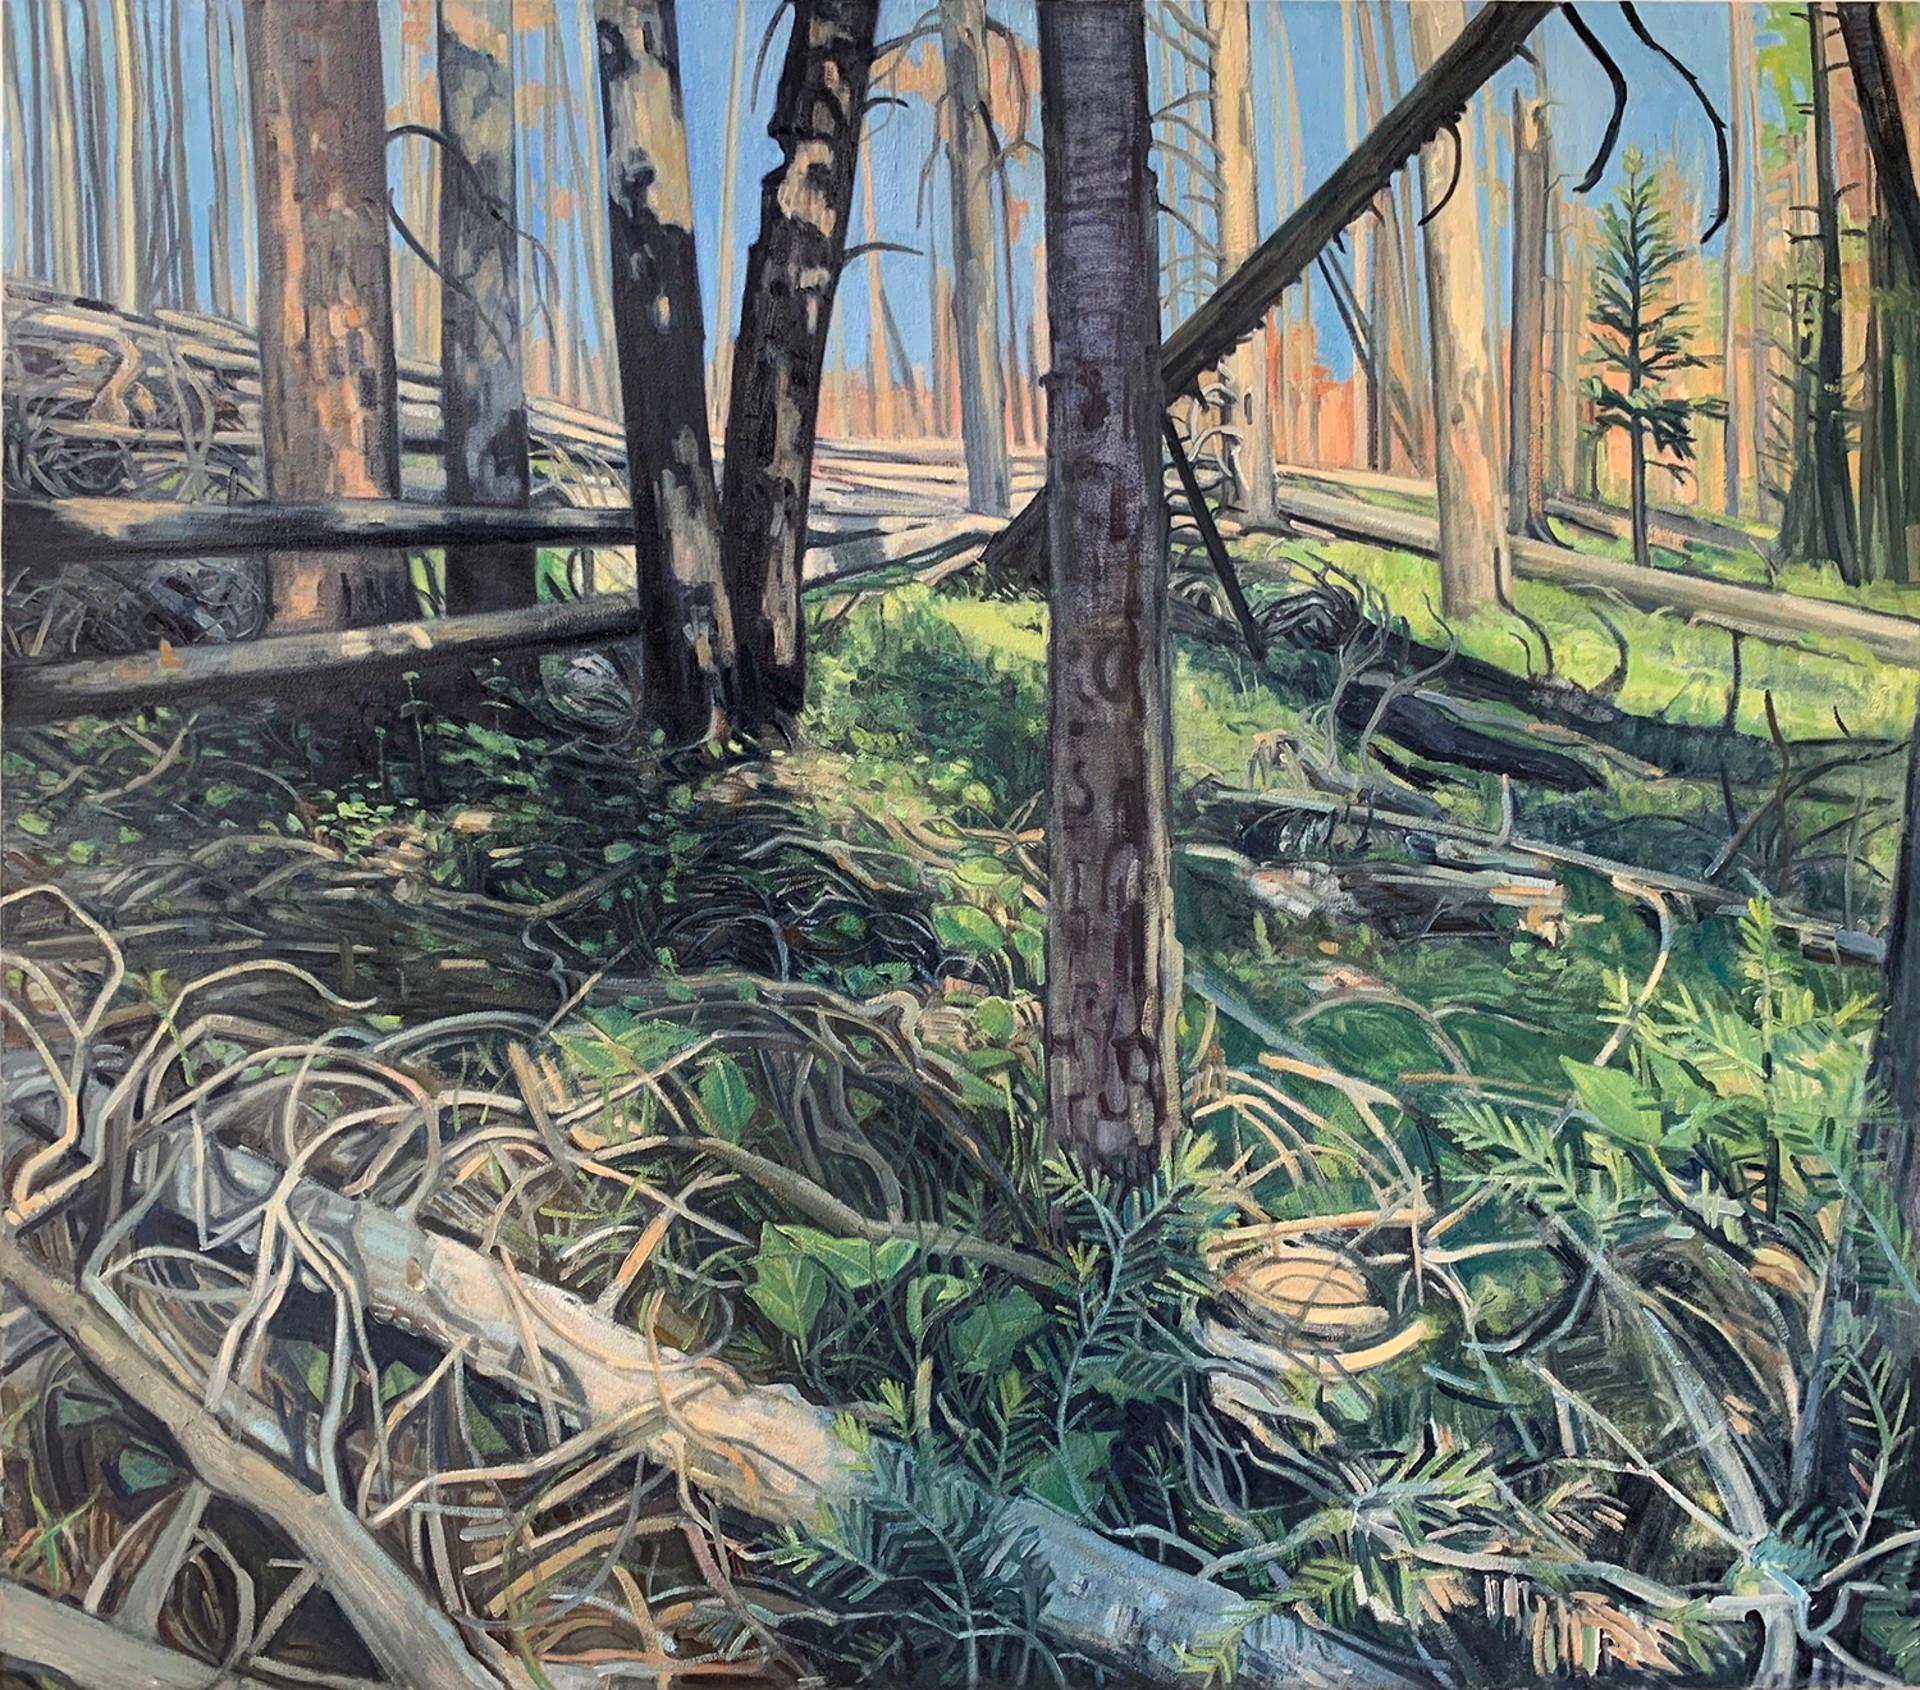 Undergrowth, Regrowth - Art by Ivy Hickam